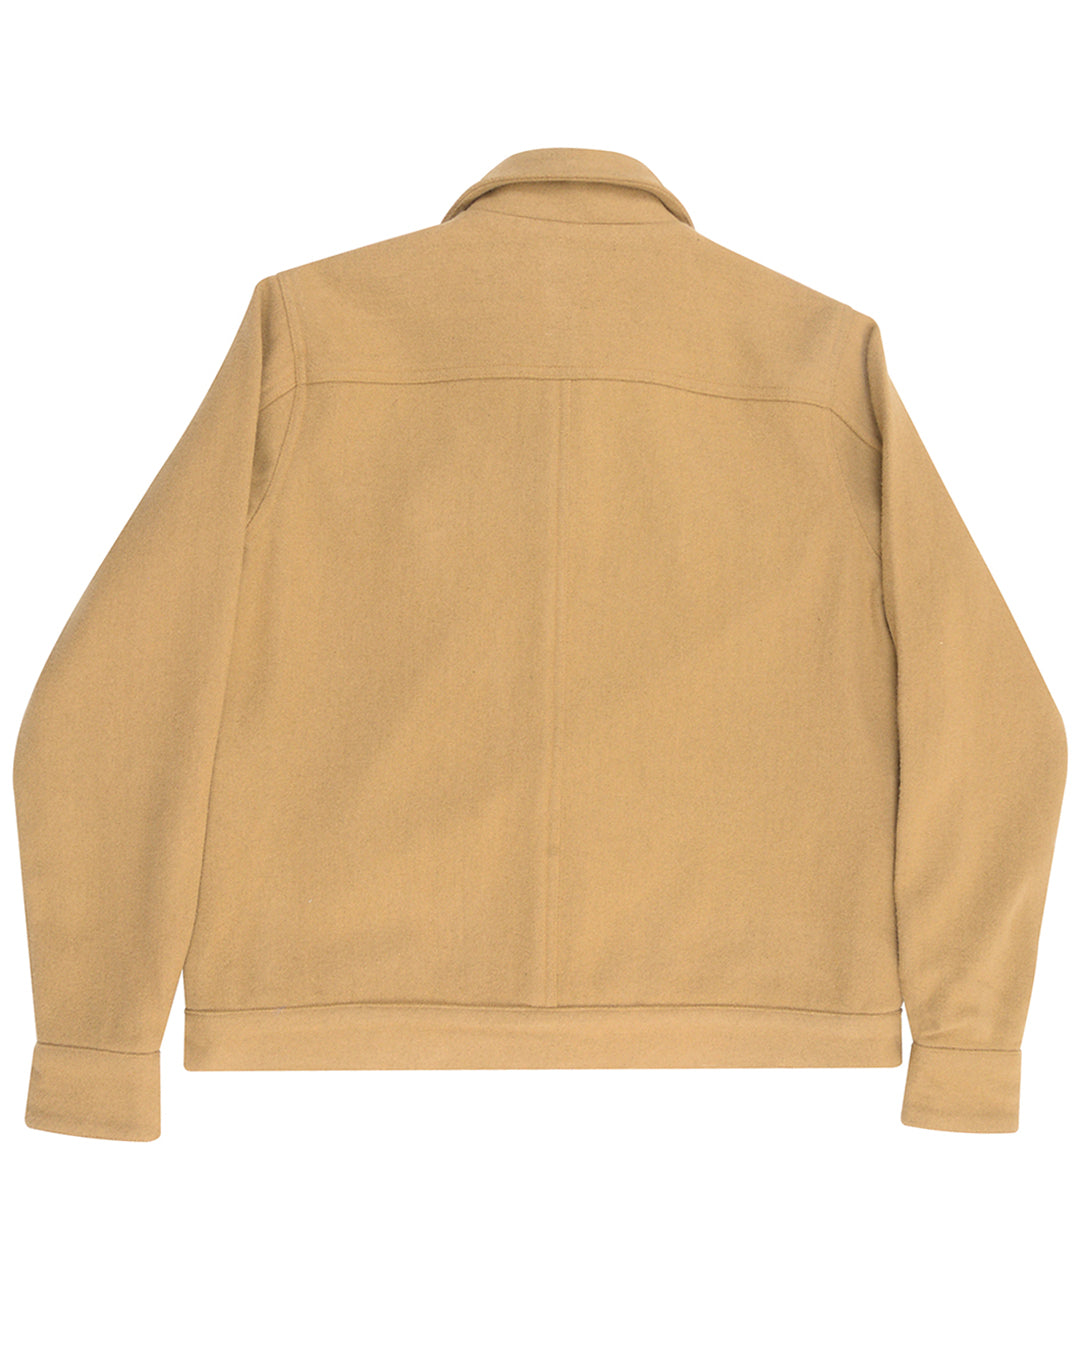 Back of the recycled wool shirt jacket for men by Luxire in camel